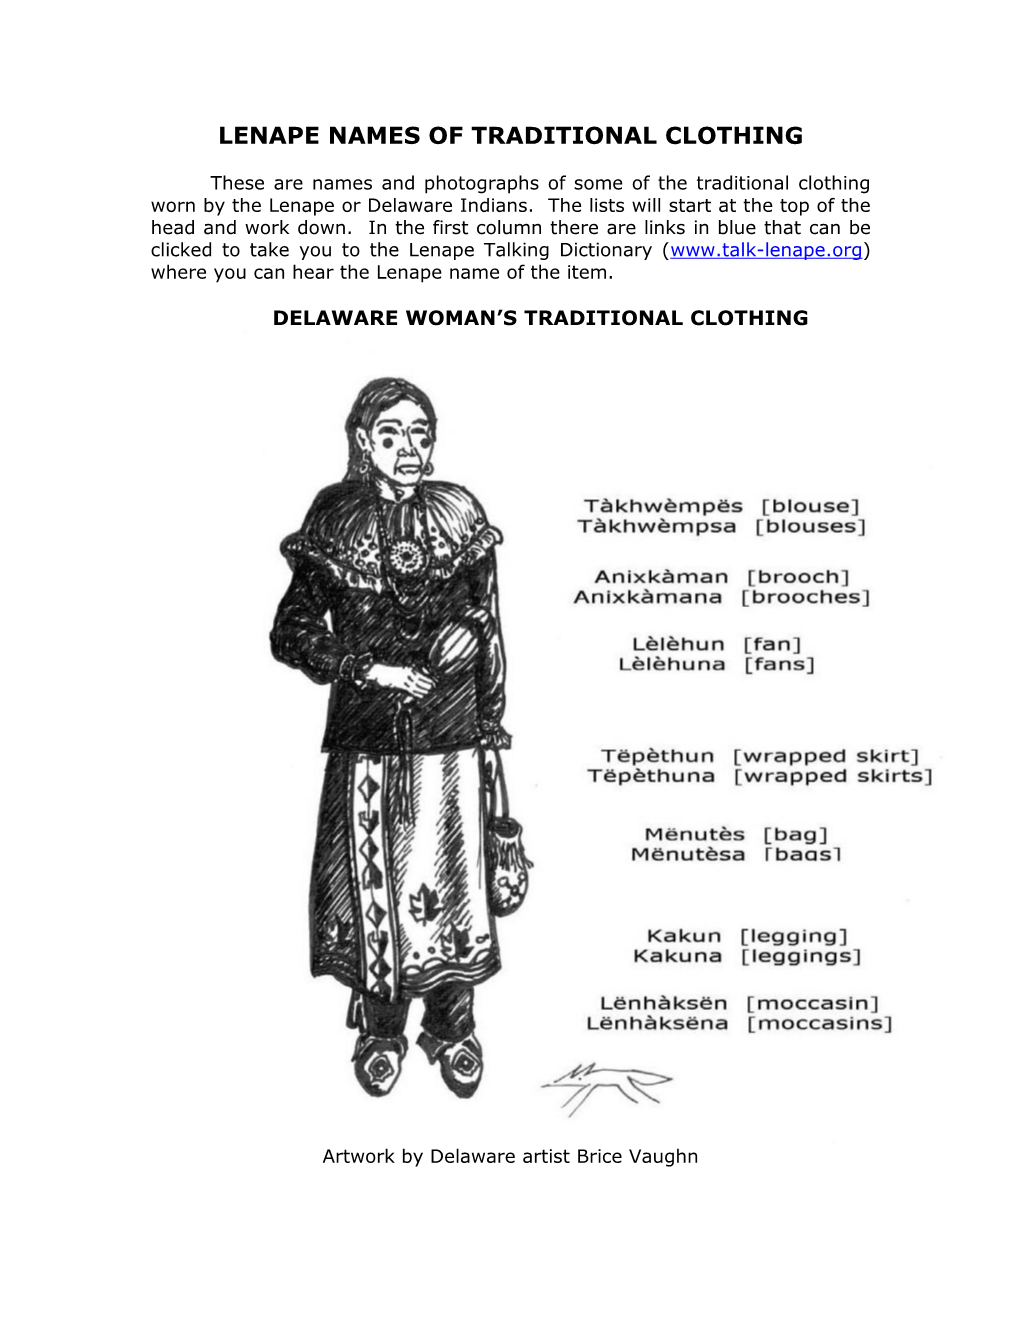 Lenape Names of Traditional Clothing